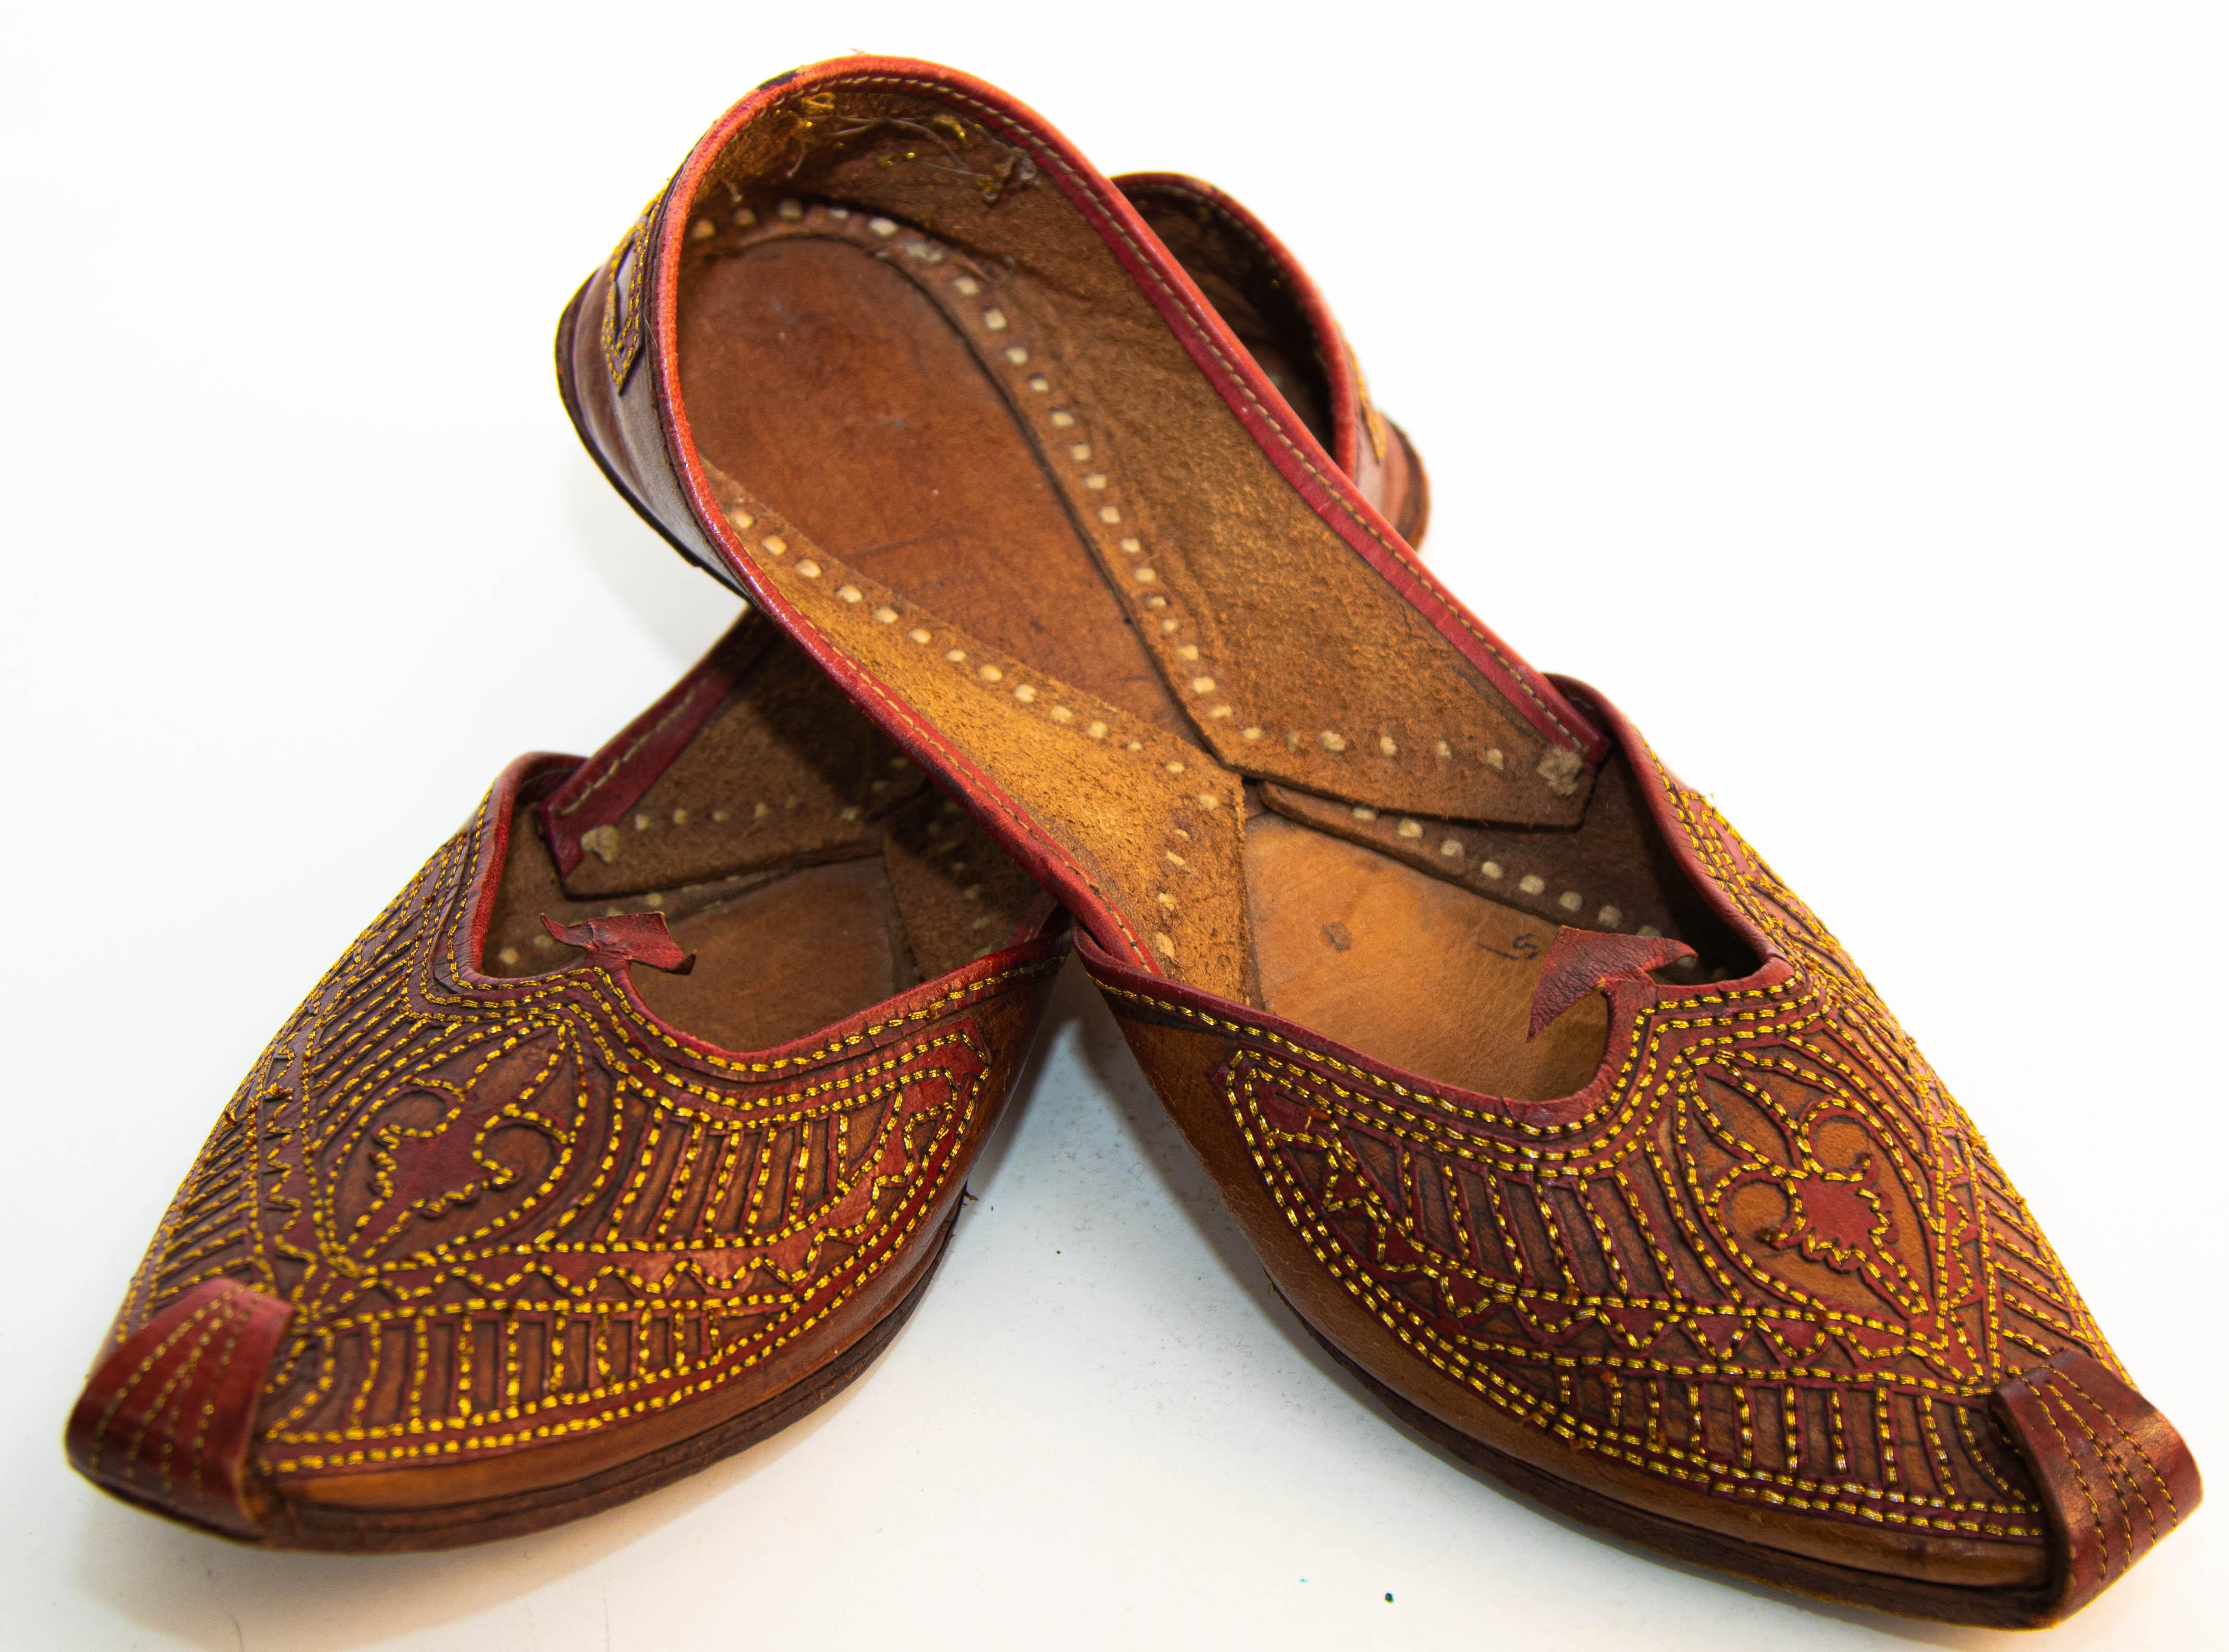 20th Century Vintage Arabian Mughal Leather Shoes with Gold Embroidered Curled Toe For Sale